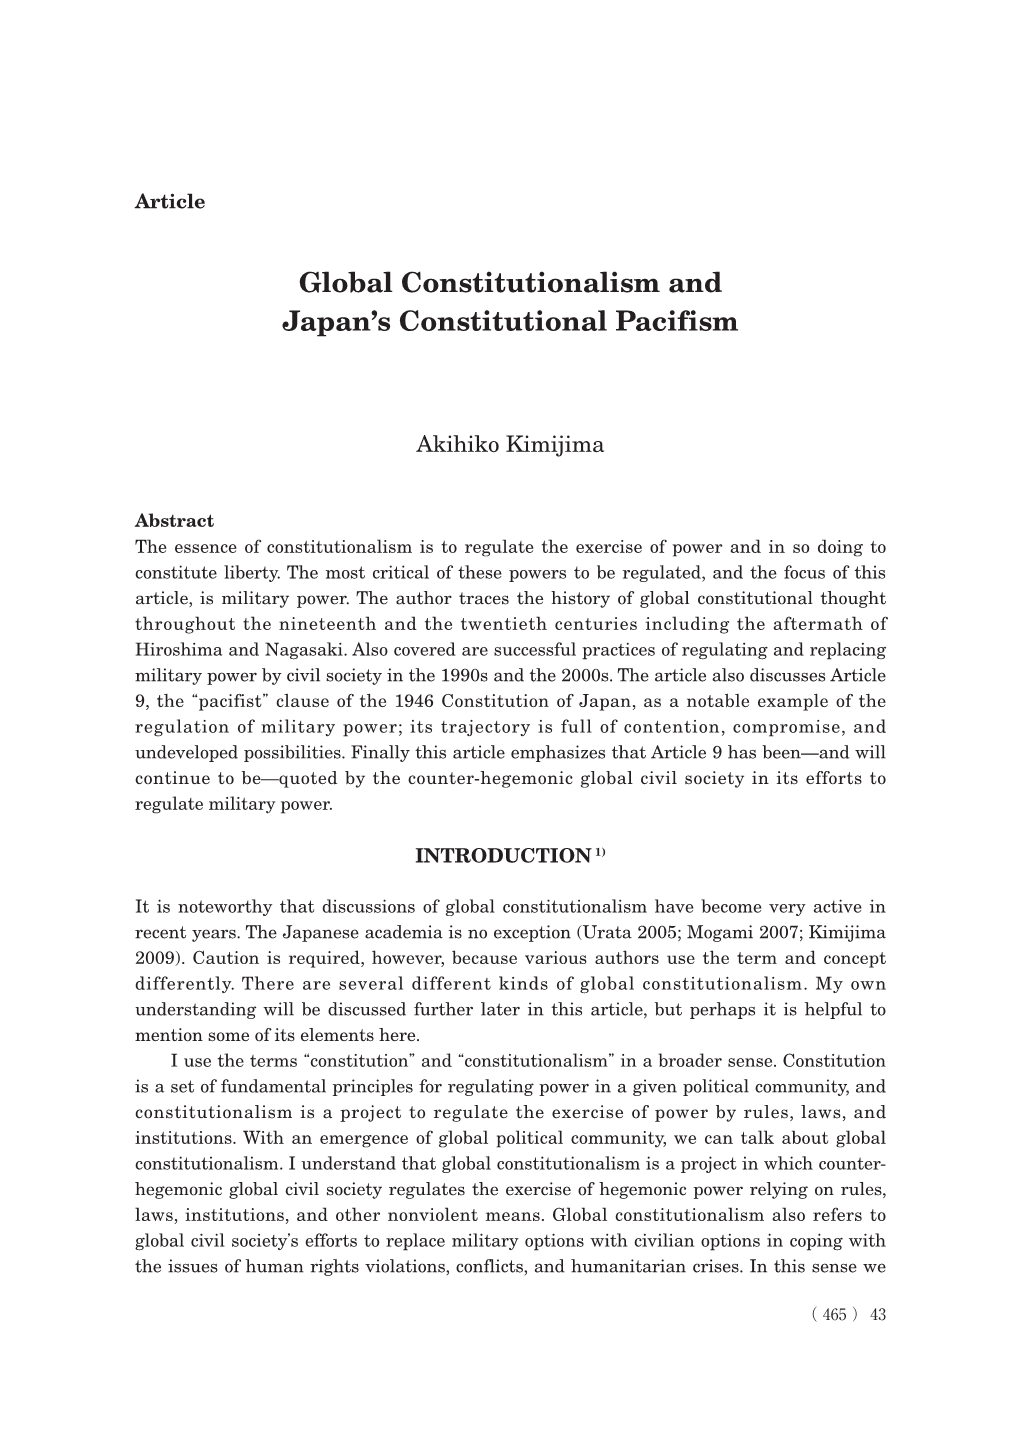 Global Constitutionalism and Japan's Constitutional Pacifism